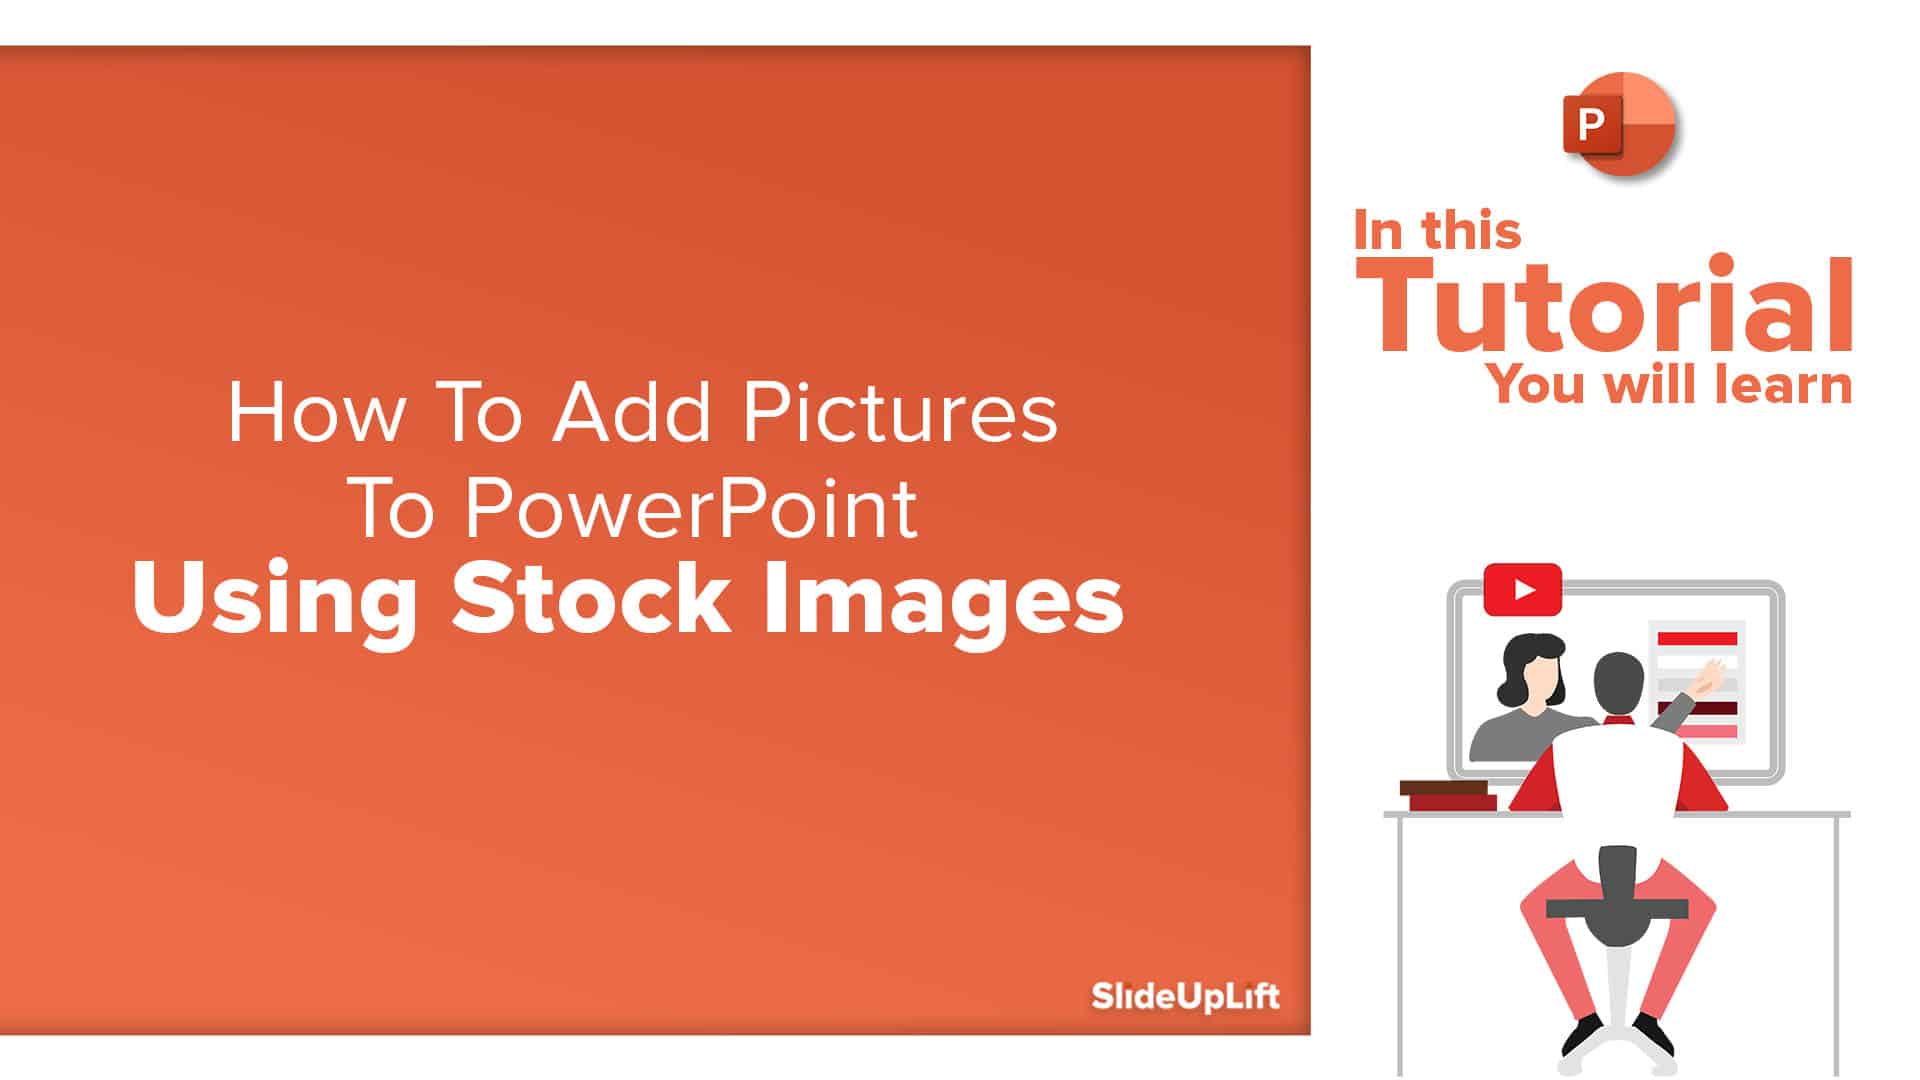 How to create a PowerPoint Zoom Animation | Grow/Shrink Animation |  PowerPoint Zoom